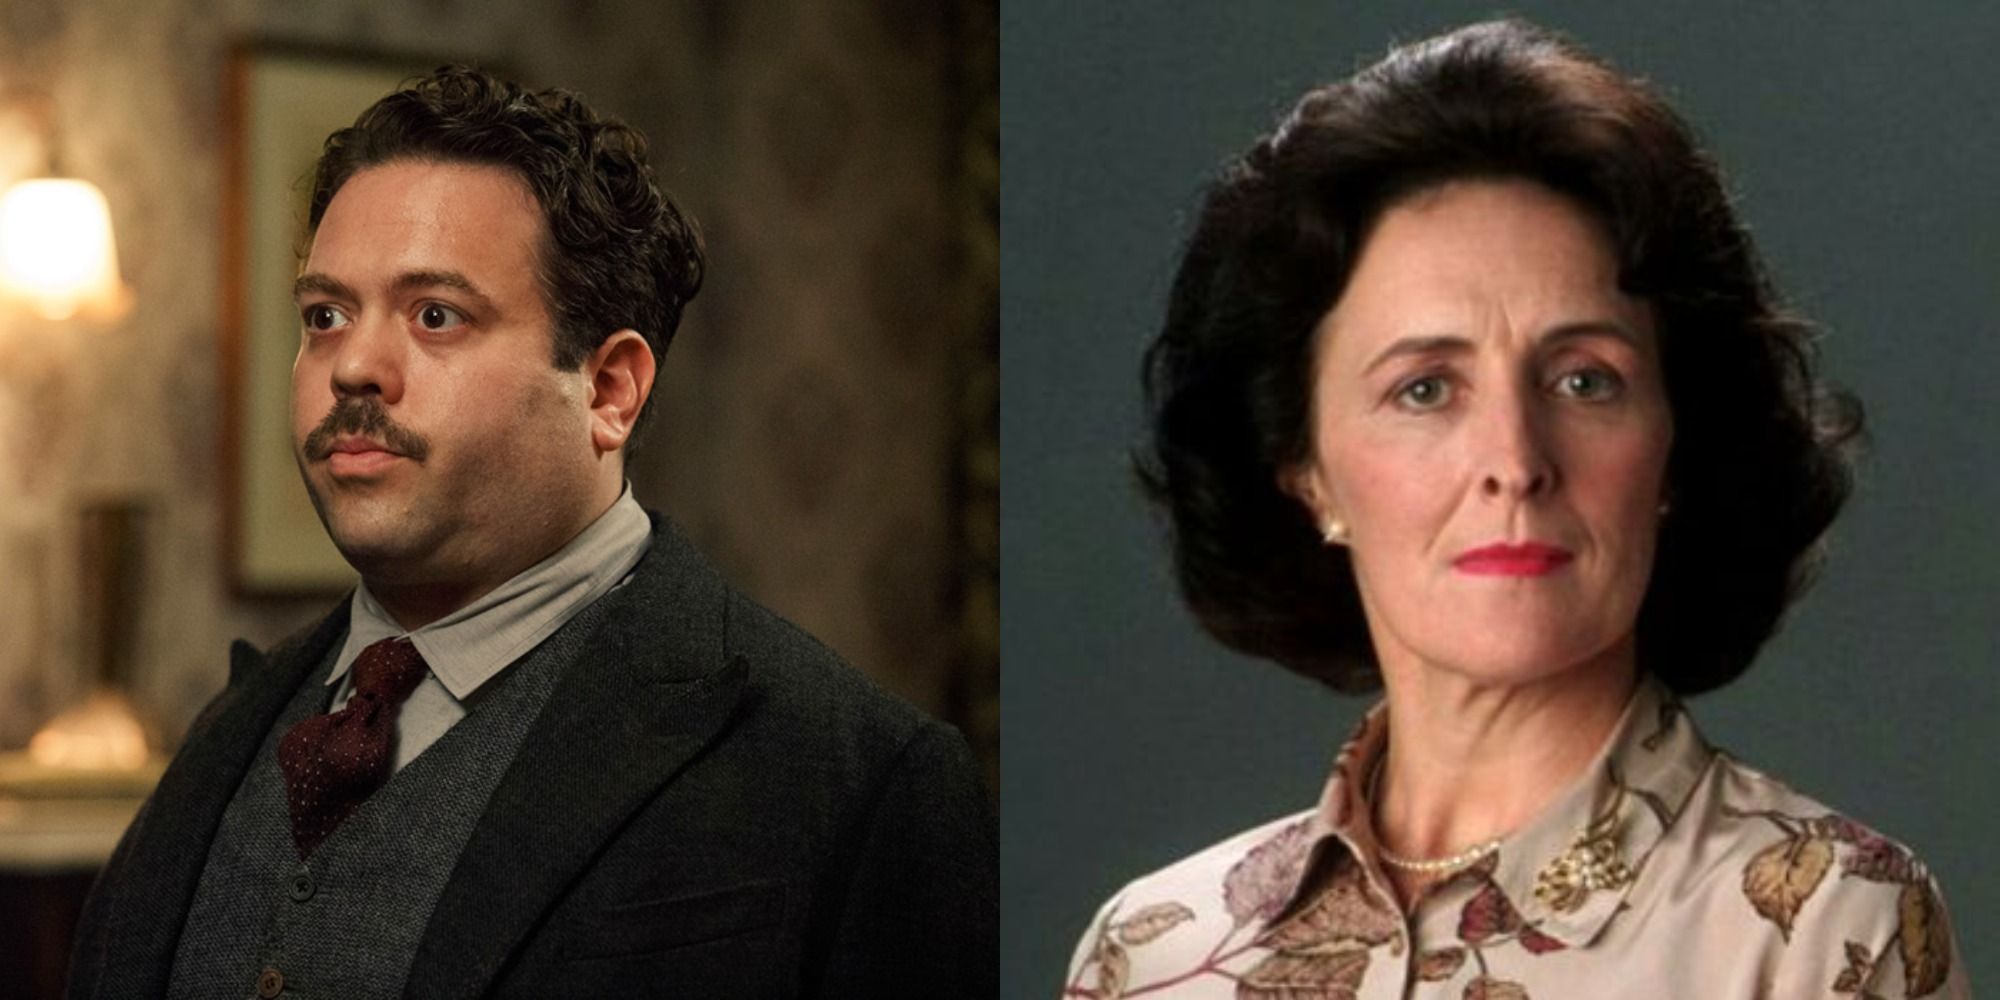 Split image showing Jacob in Fantastic Beasts and Aunt Petunia in Harry Potter